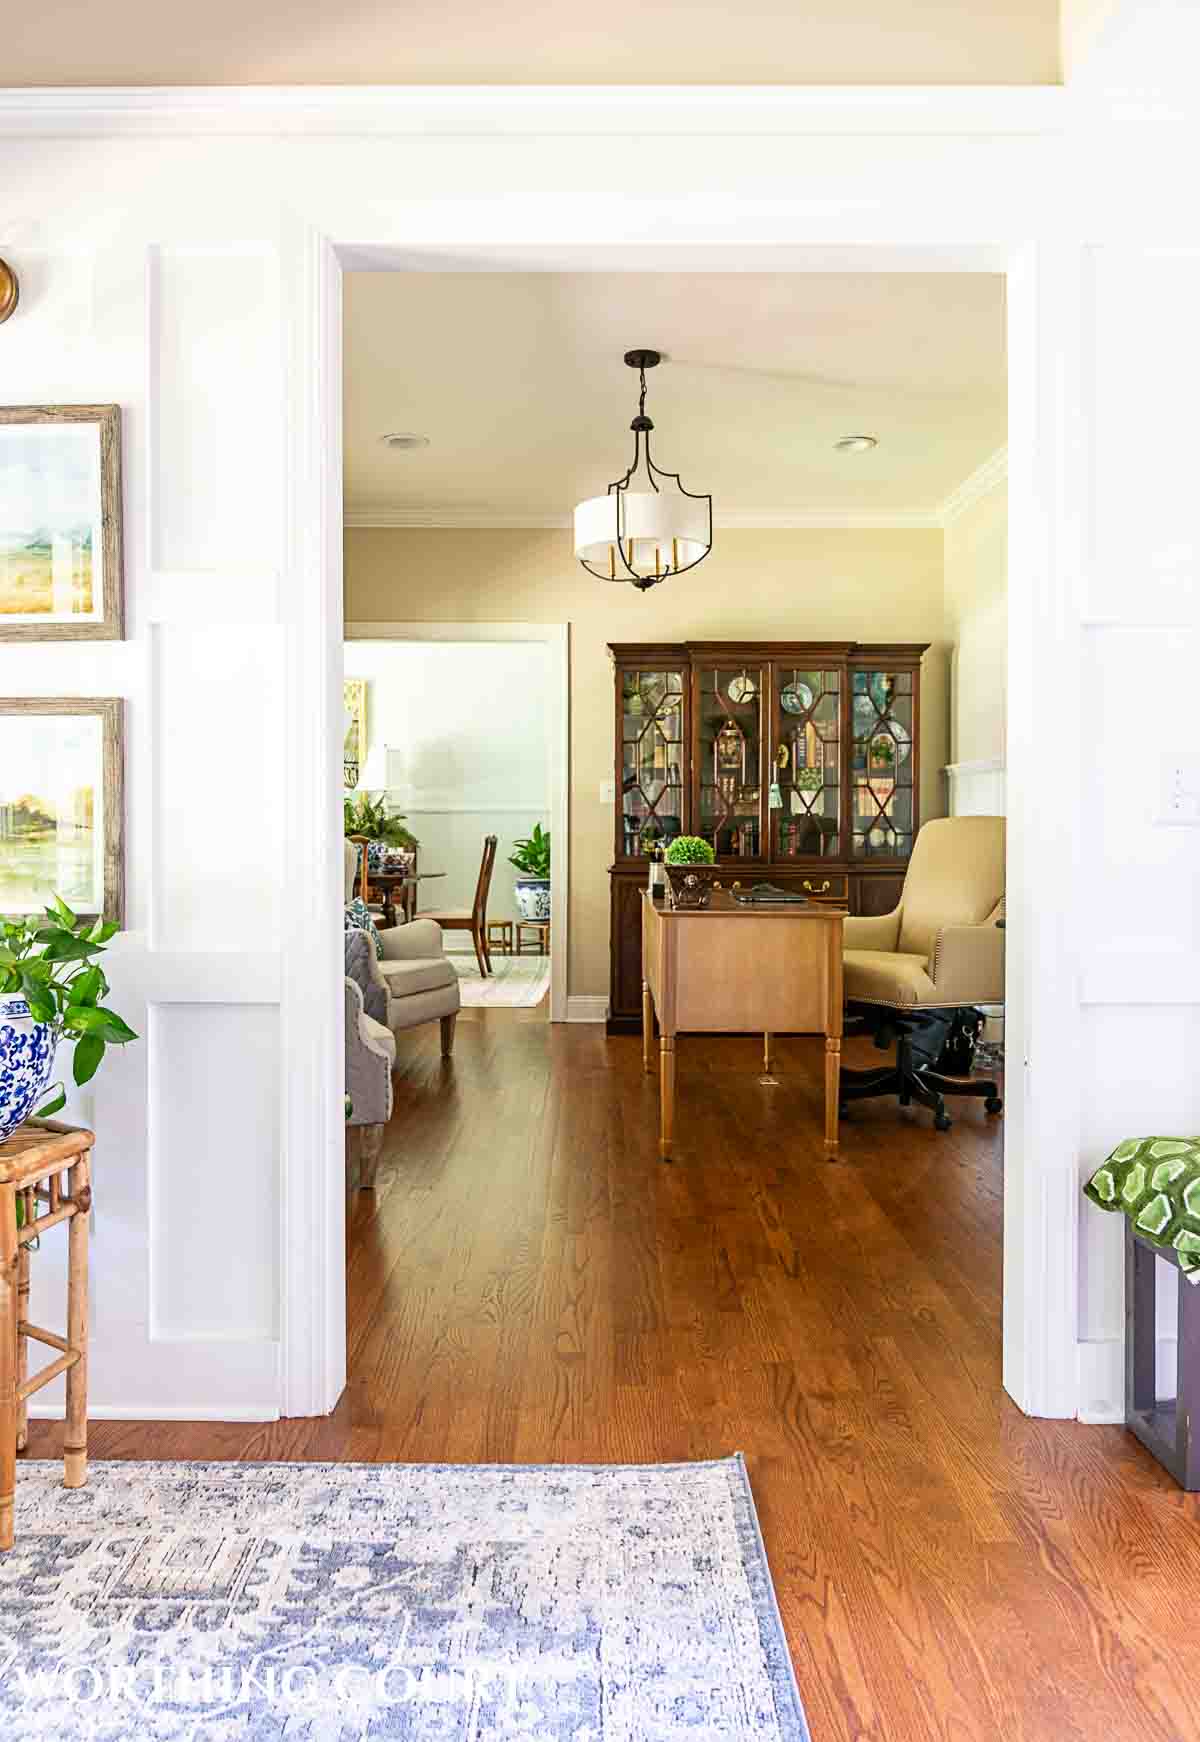 How to Choose an Entryway Rug Size